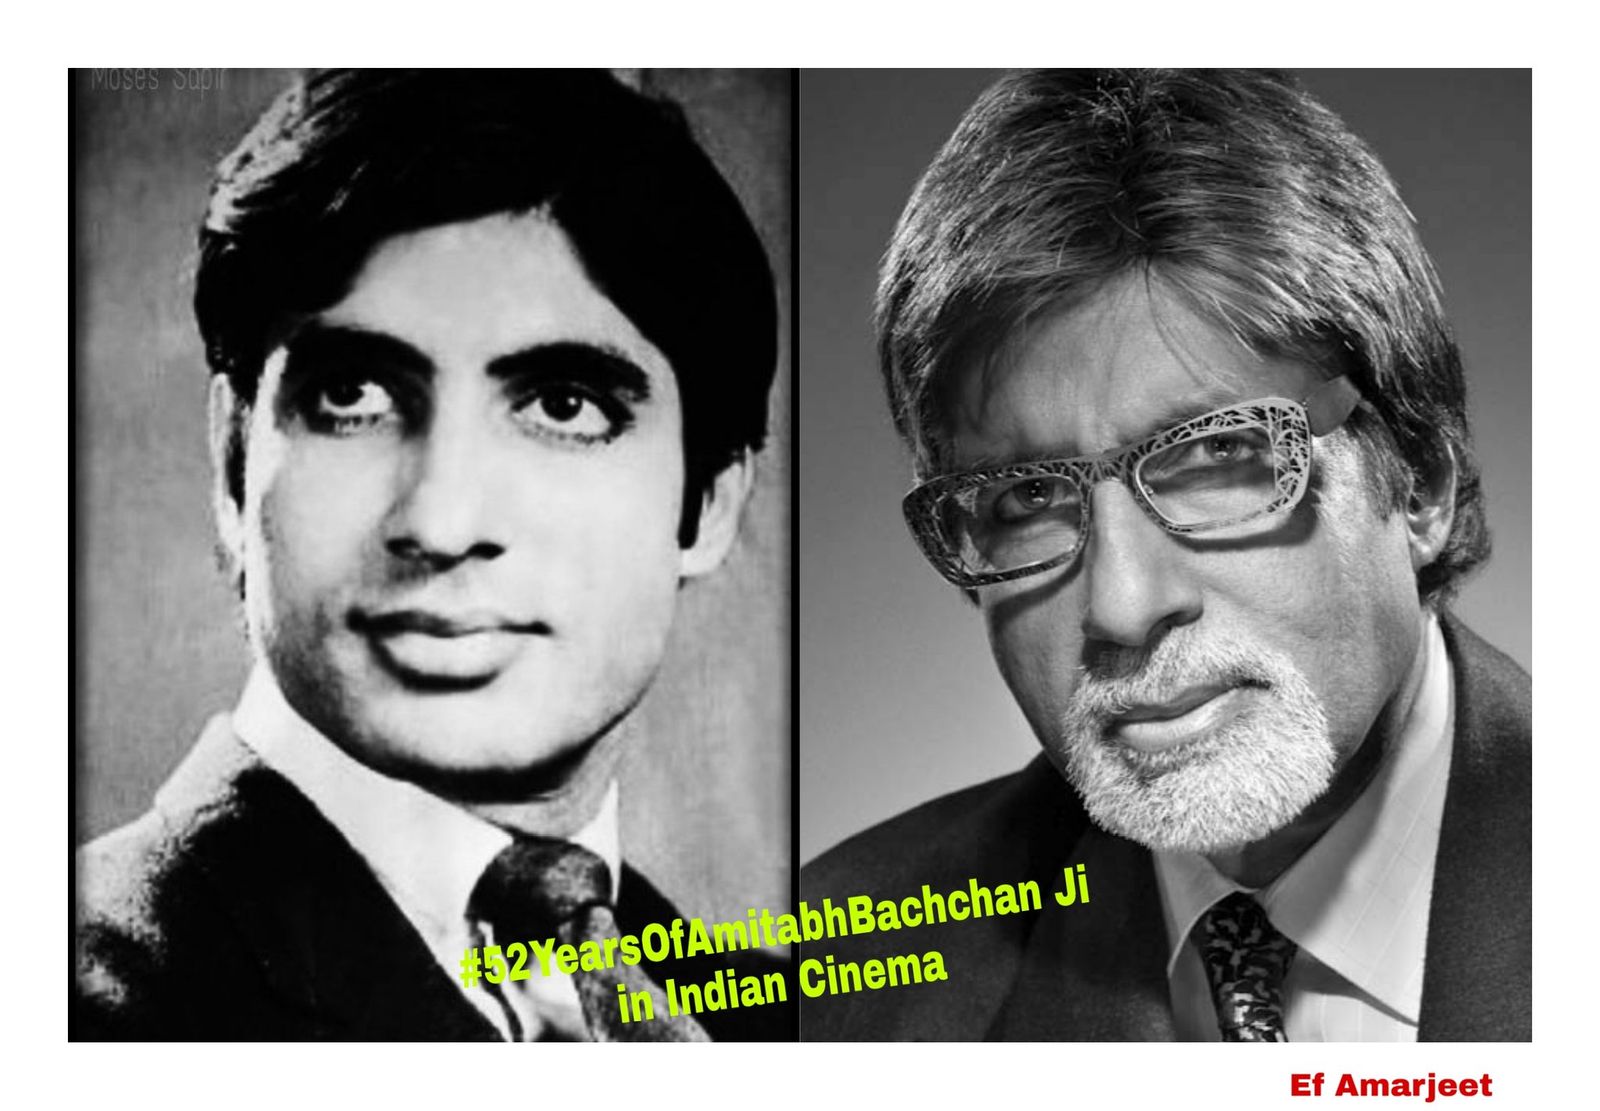 Amitabh Bachchan Celebrates 52 Years In Bollywood, Expresses Gratitude To His 'Extended Family' Of Fans And Audiences